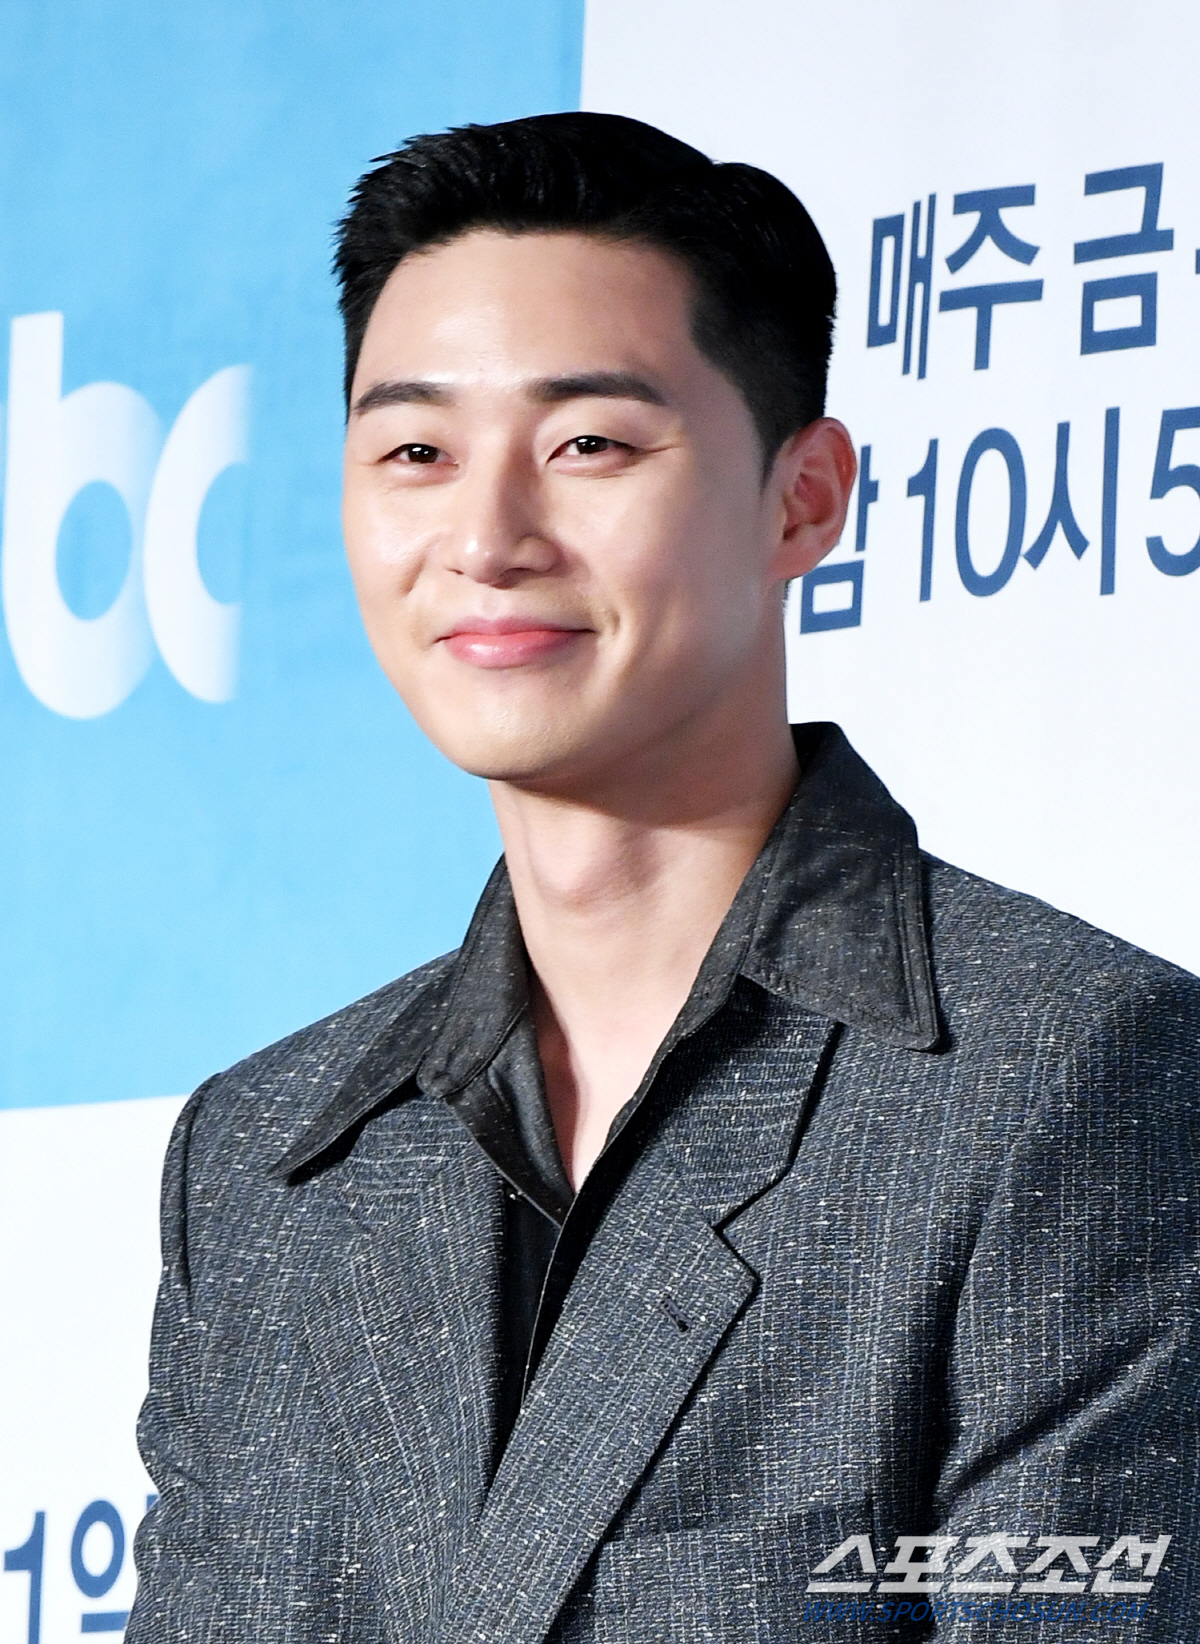 Kim Seong-yoon PD commented on Itaewon Klath scriptOn the afternoon of the 30th, JTBCs new gilt drama Itaewon Clath (directed by Jo Kwang-jin, directed by Kim Seong-yoon) was presented at the Conrad Hotel in Yeouido, Yeongdeungpo-gu, Seoul.The event was attended by Park Seo-joon, Kim Dae-mi, Yoo Jae-myeong, Kwon Na-ra, Kim Seong-yoon PD, and Jo Kwang-jin.Kim PD said, I was worried that I would not be able to get rid of the ambassadors when I hit the ambassadors. I talked to the artist a lot and I also read a lot of actors.I was worried about what to do with the fluttering ambassador, but when I saw Park Seo-joon on the first round of shooting, I was really fluttering when I looked at the ambassador in the mirror.But Seo Jun did it, and it was too soft. I thought, This is Actors ability. The director gave me one and two presentations.I think I drew a cartoon after watching Drama. I heard that Park Sae-ro is a good match for Park Seo-joon.There are ambassadors, and I think it will be fun to watch how to do the process. I asked the artist in the process of adaptation, and it was a fun point that Itaewon was the background.The story of the business that the log line is a clear story and the background of Itaewon in the door was attractive.Among the interesting characters, I thought it would be fun if a foreigner who can not speak English entered, so I put in a part-time job, and the artist made a remady again.It seems to be another fun point to see his Remady Itaewon Clath is a drama that moved Web toon Itaewon Clath, which was evaluated as a story of youths living in an absurd world, to the CRT. Park Seo-joon, who was constantly mentioned in the virtual casting stage, joined the characters and raised the expectation of viewers.In particular, Kim Seong-yoon PD, who was recognized for his sensual production through Gurmigreen Moonlight and Discovery of Love, grabbed a megaphone and wrote directly by Jo Kwang-jin, author of Web toon.Here, expectations are gathered as the first drama that the production company Showbox, which showed many movies with both workability and popularity such as Taxi Driver, Assassination and Tunnel, will show.It will be broadcast first at 10:50 p.m. on the 31st.